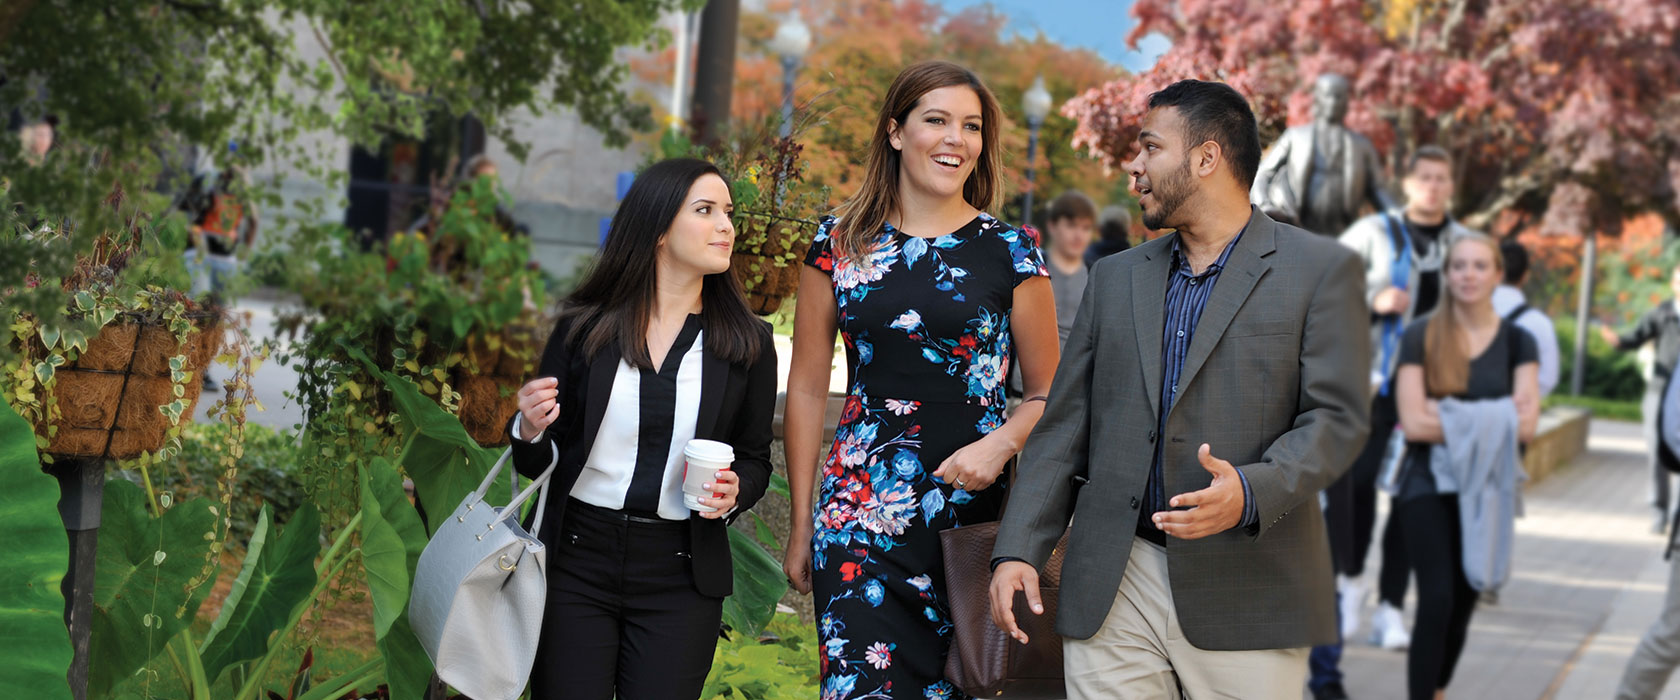 Three Law Students Walking Together on Campus